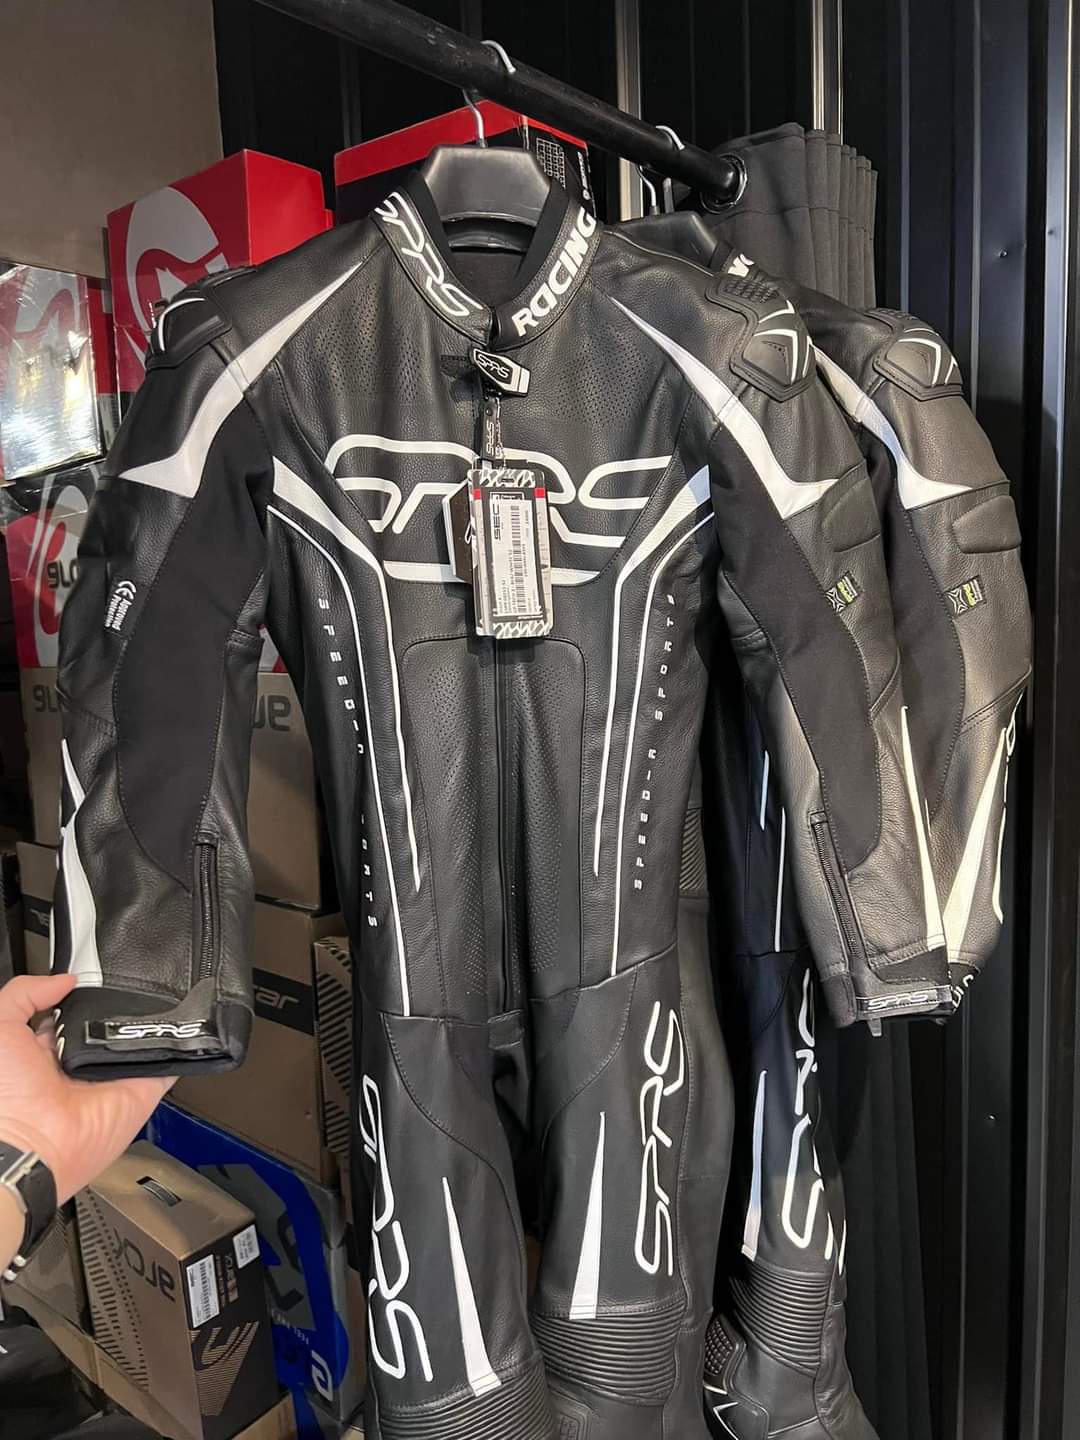 SPRS R1 FULL LEATHER RACING SUIT 48 SIZE ORIGINAL SPRS FROM SEC ...